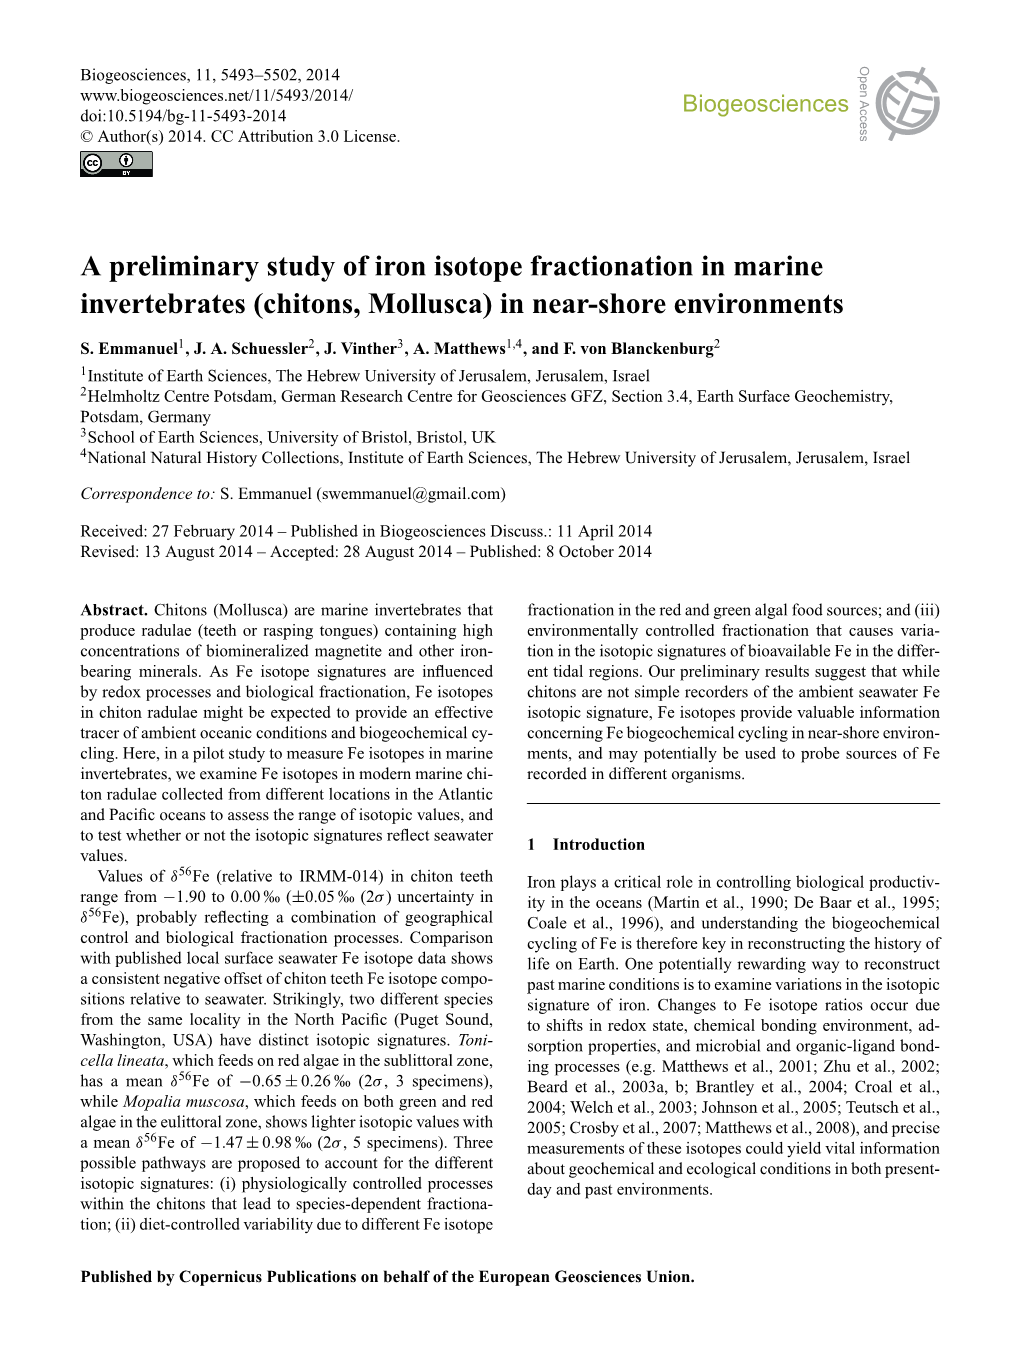 A Preliminary Study of Iron Isotope Fractionation in Marine Invertebrates (Chitons, Mollusca) in Near-Shore Environments